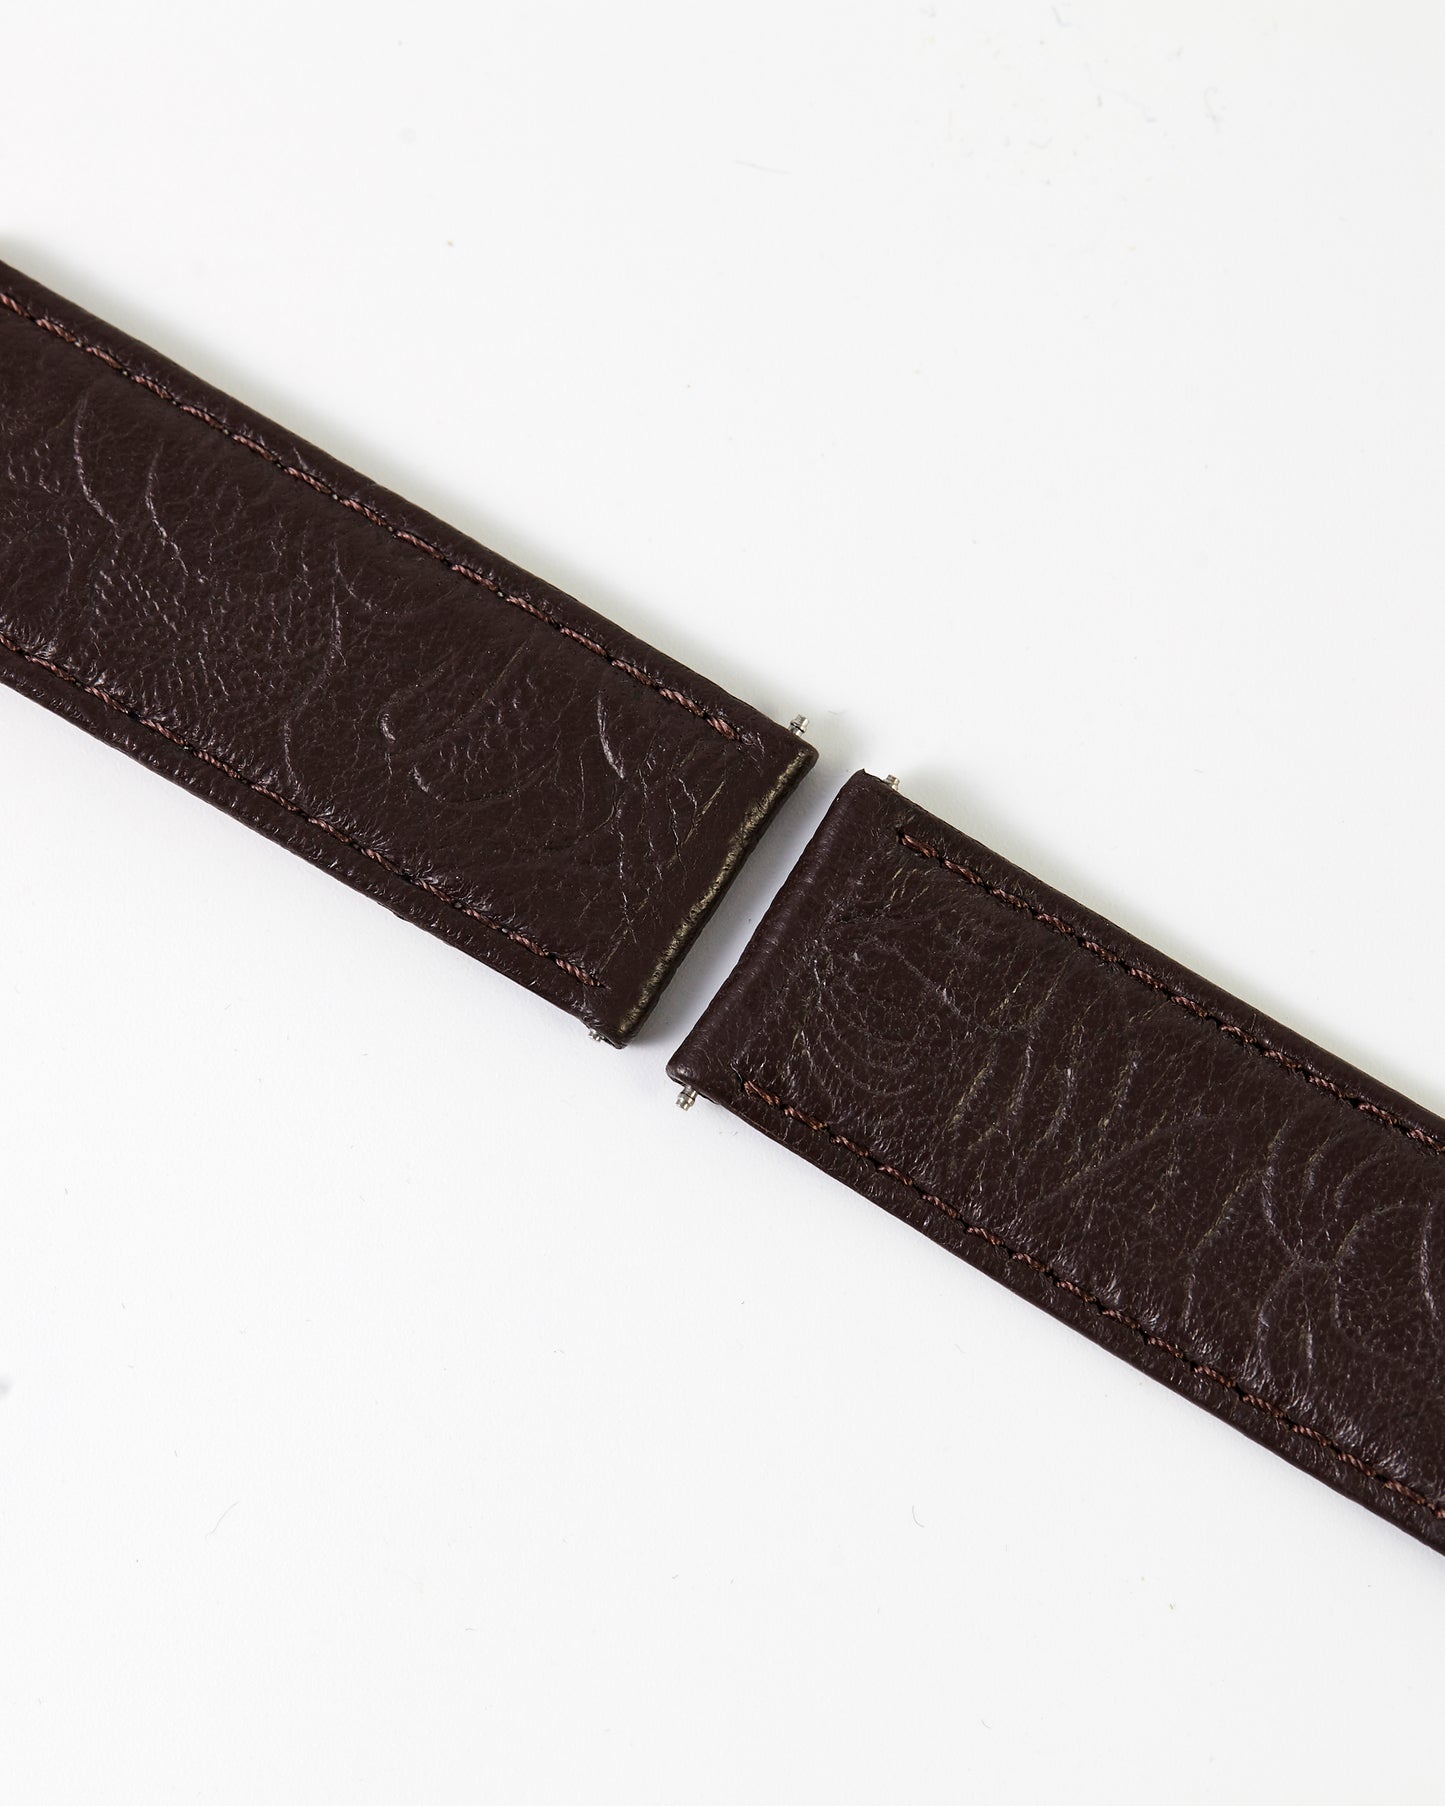 Ecclissi 62524 Brown Leather Strap  20mm x 20mm